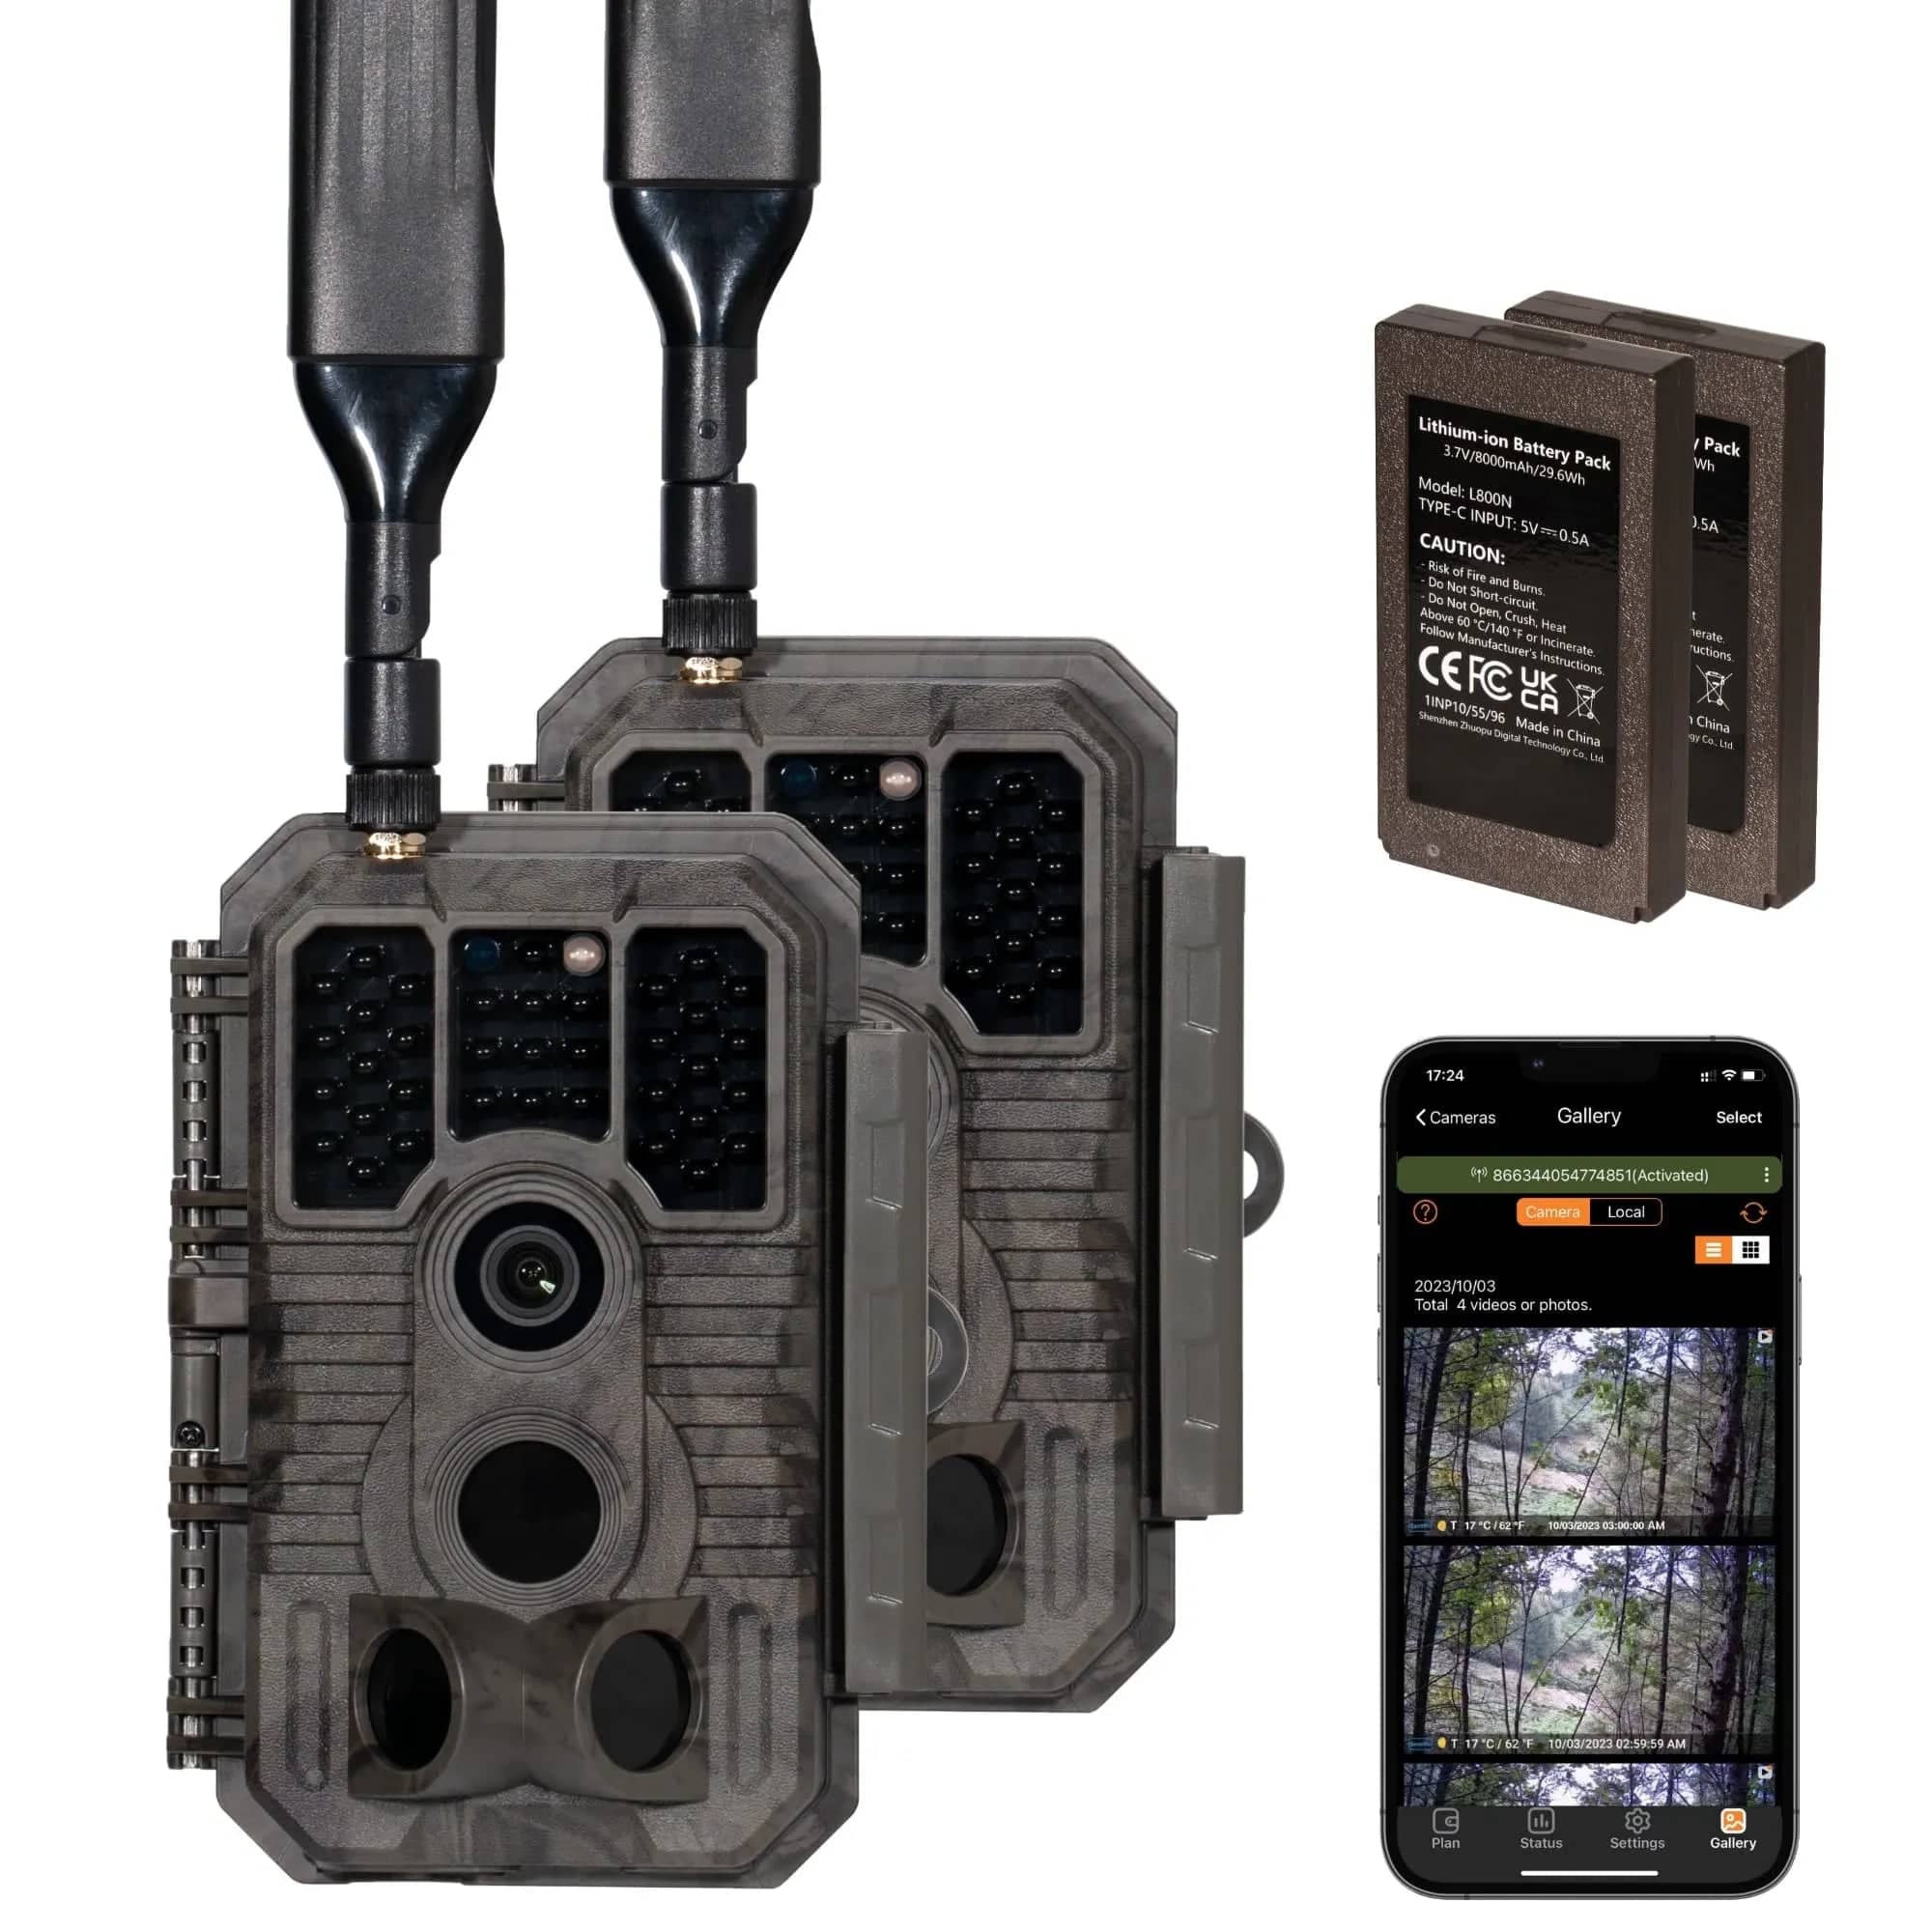 GardePro Cellular Trail Camera X60P Pre-Installed Contract SIM With Rechargeable Battery 2-Pack